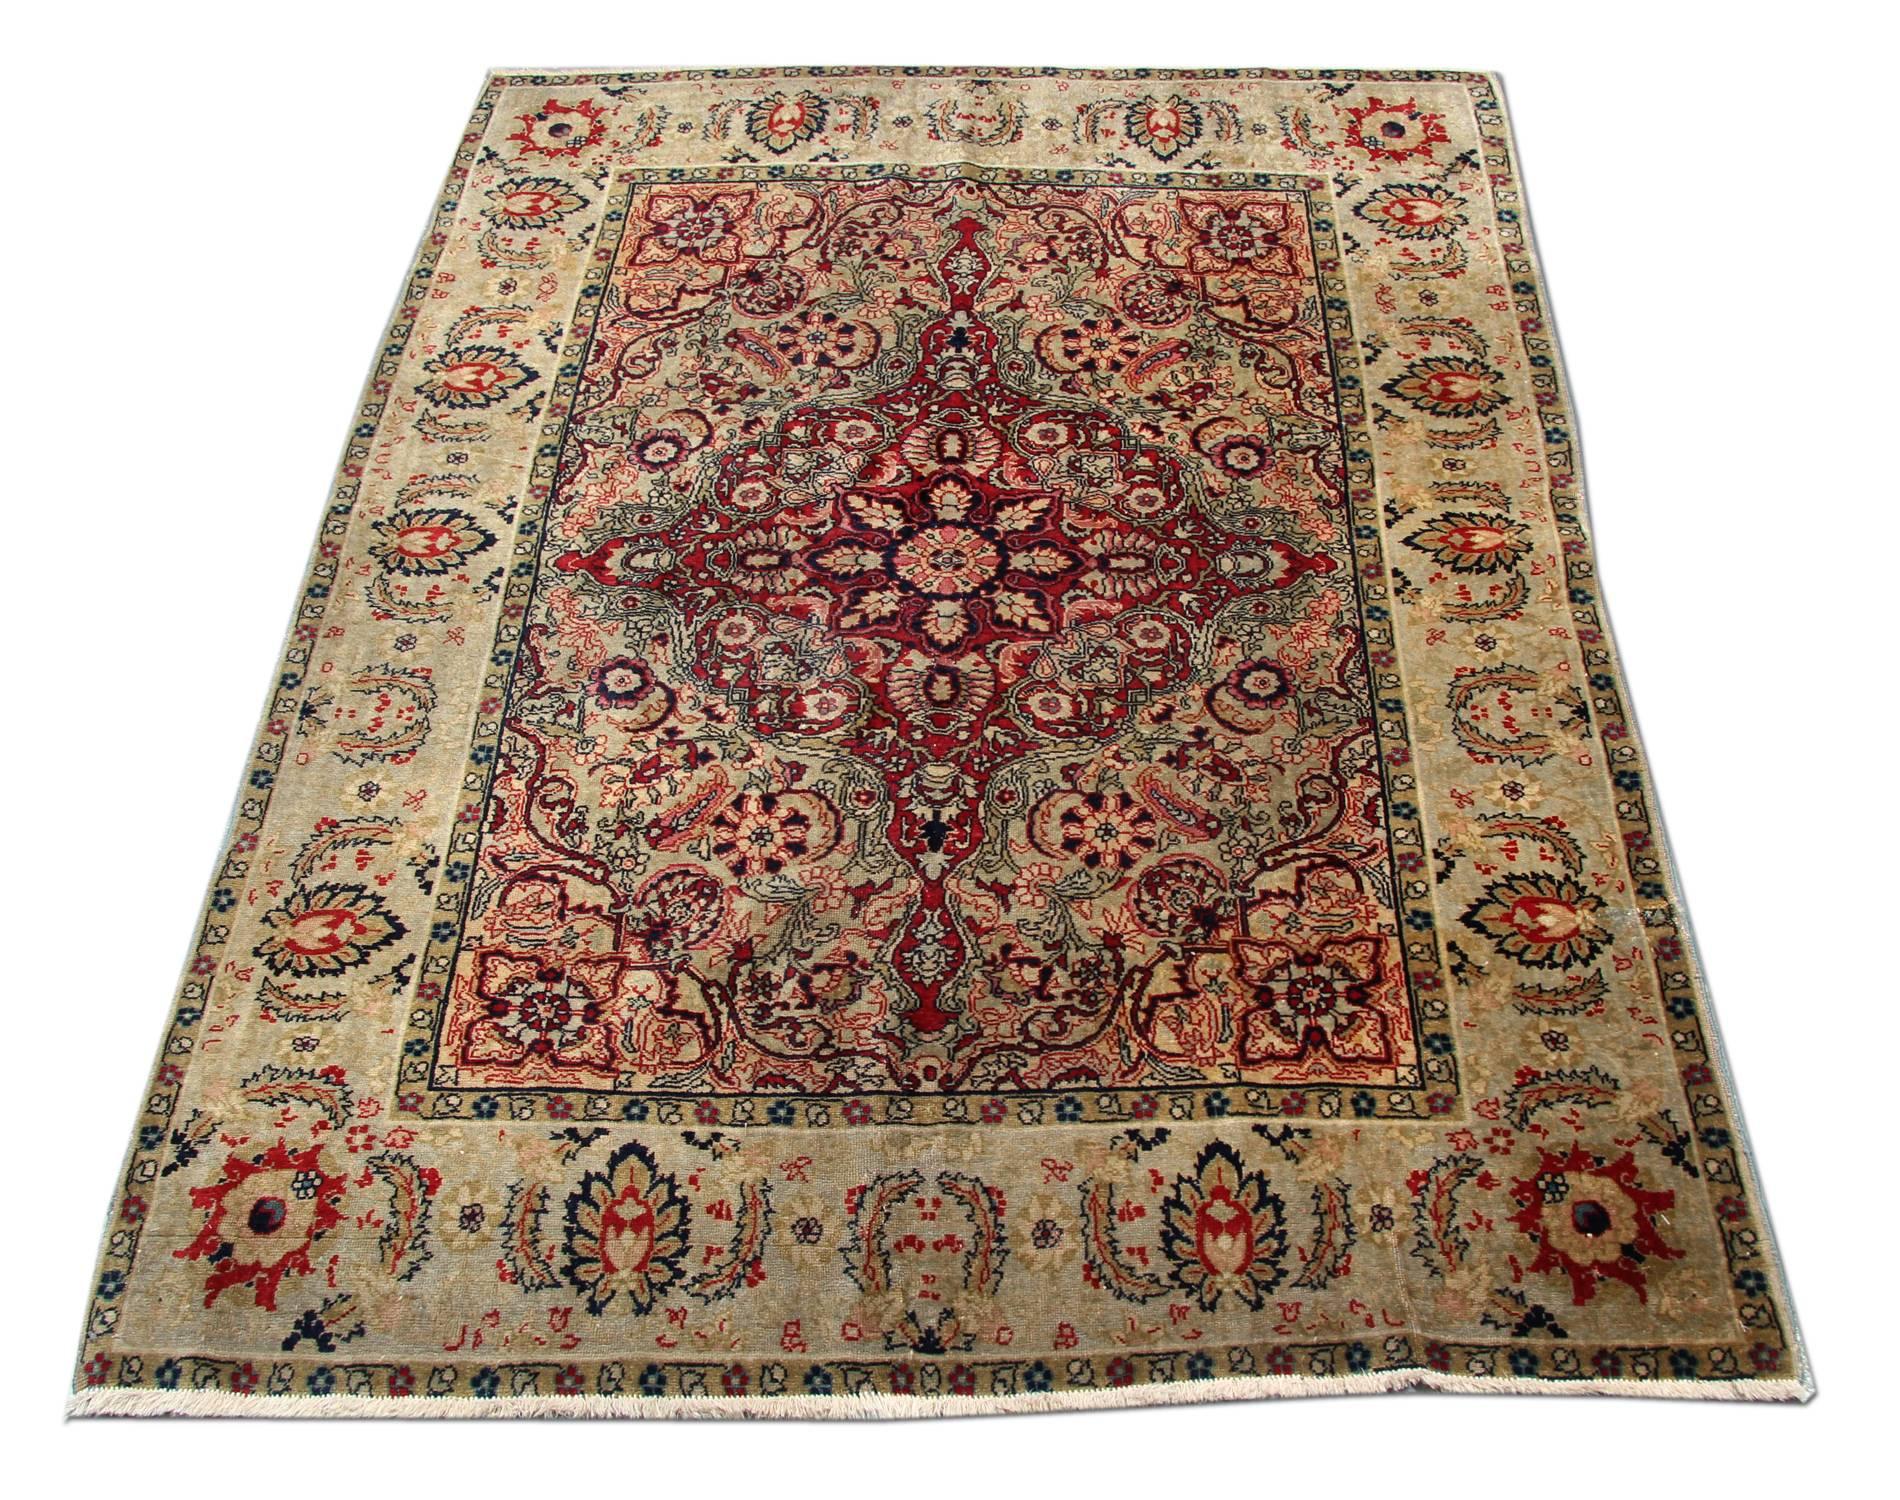 These handmade carpet luxury rugs look beautiful and would stand out as dining room rugs or bedroom rugs as an interior design object. These washable rugs are one of a kind and cannot be found in every rug warehouse or rug store. This oriental rug